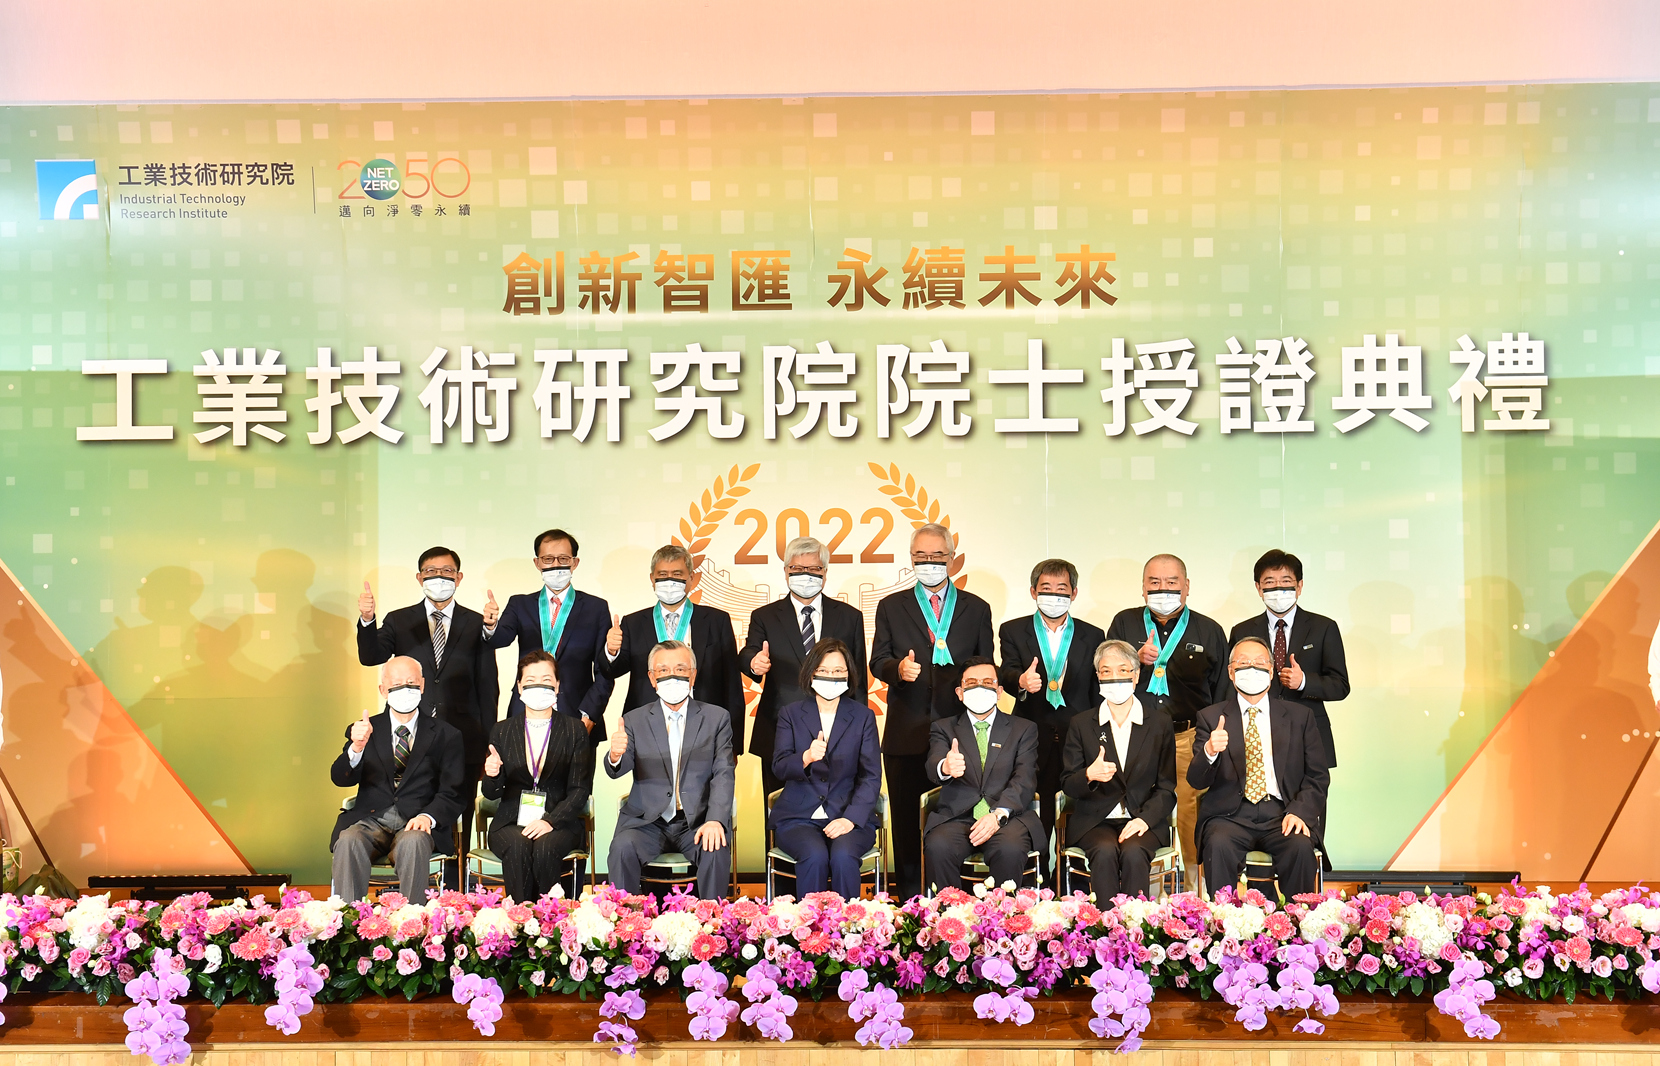 ITRI held the 2022 ITRI Laureate Ceremony on November 11, 2022 to honor the five newly appointed laureates.